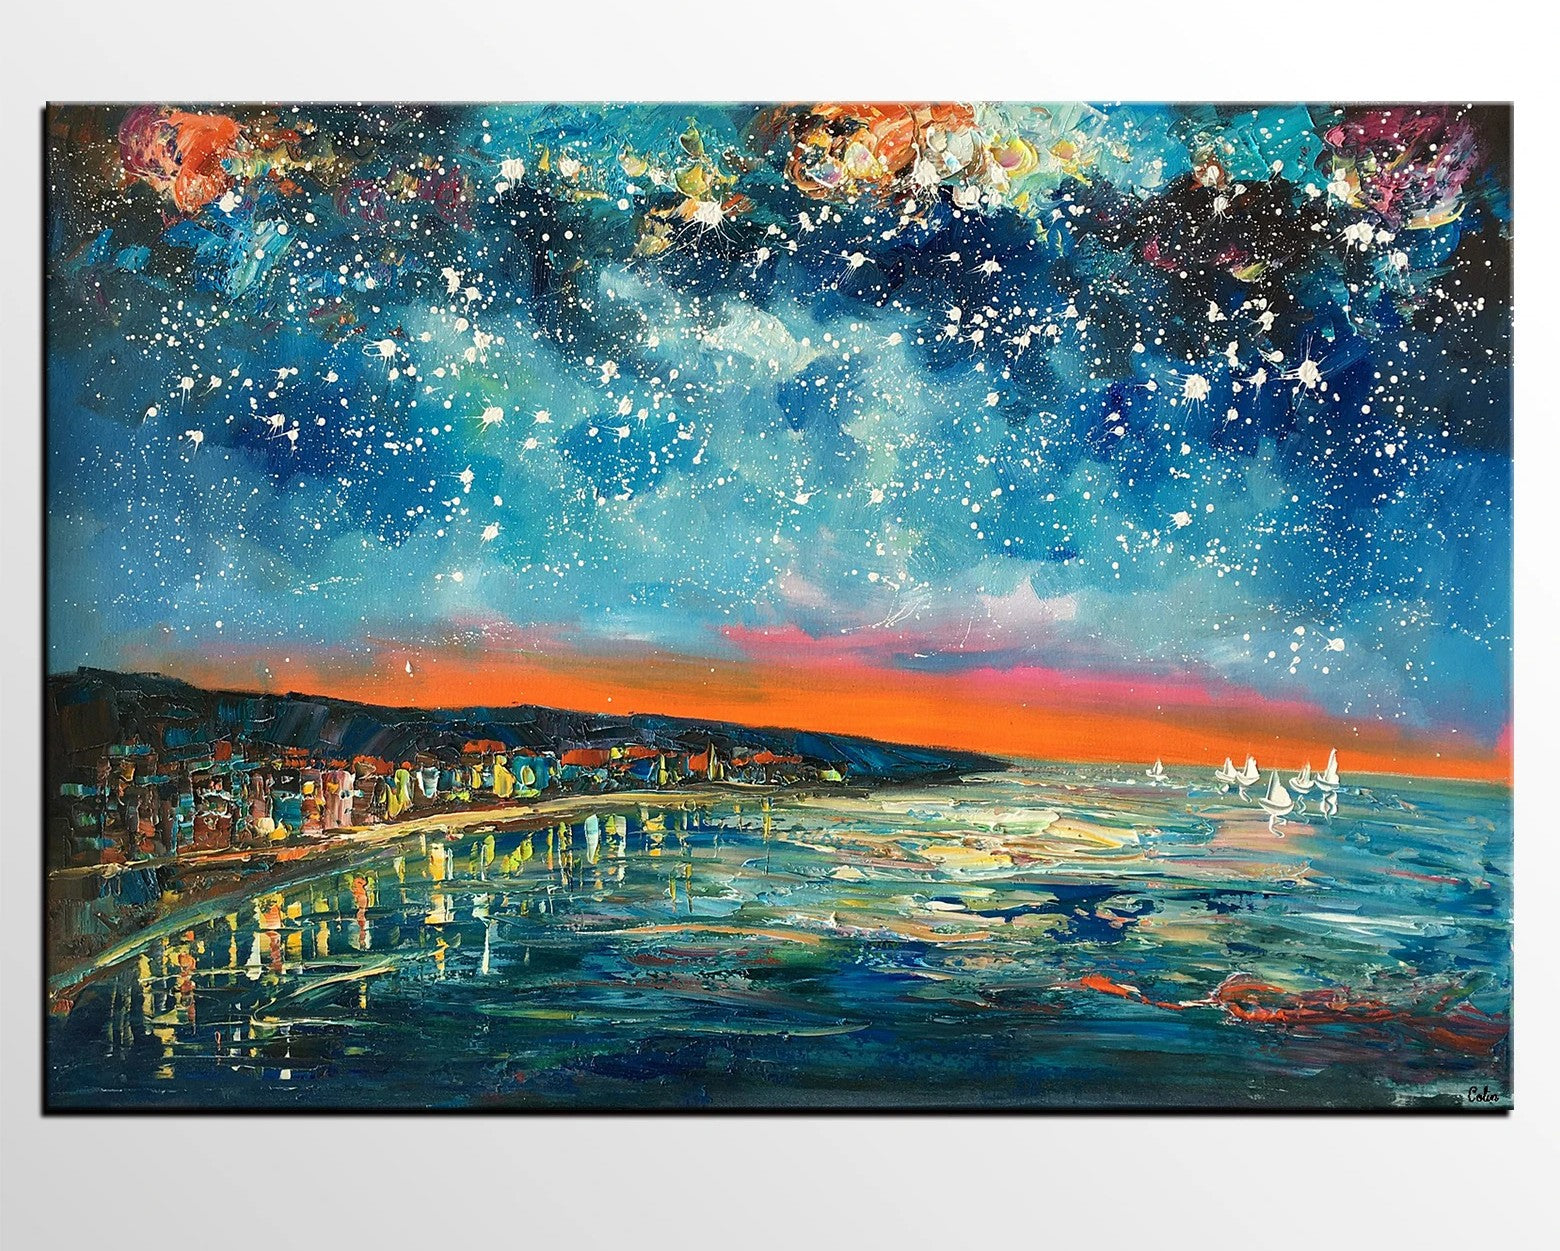 Landscape Canvas Paintings, Starry Night Sky Painting, Landscape Painting for Sale, Custom Original Painting on Canvas